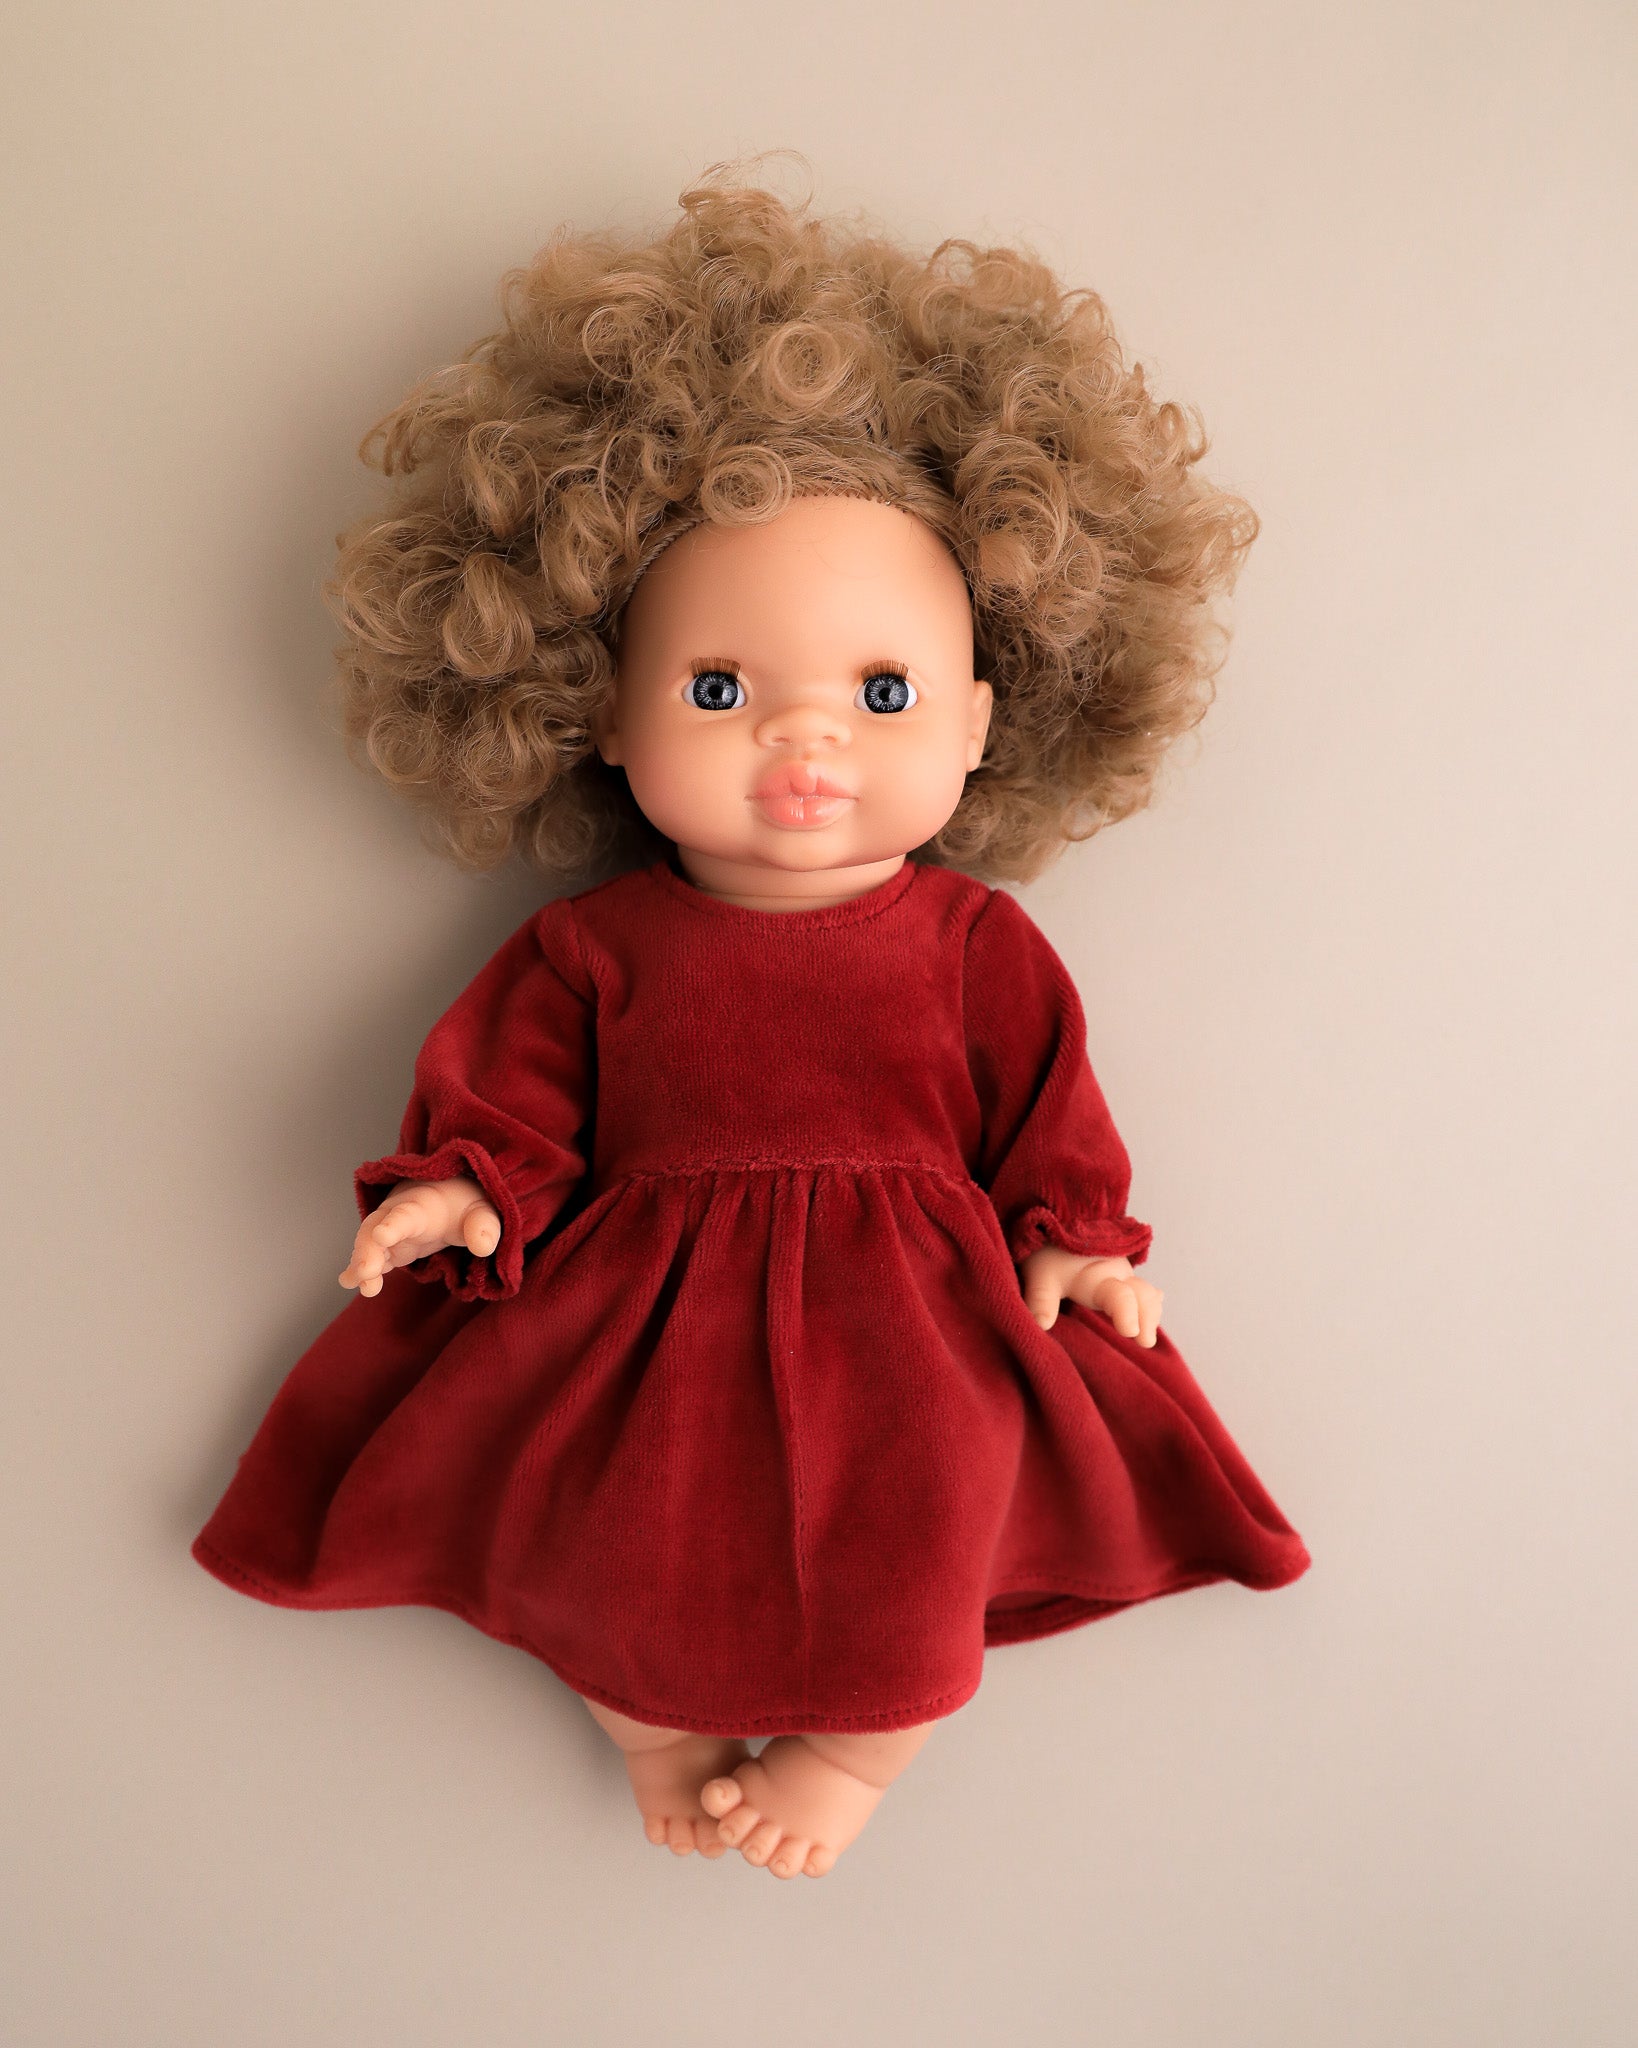 doll dress, doll clothes, clothes for dolls, dress up, doll accessories, minikane dolls, minikane doll clothes